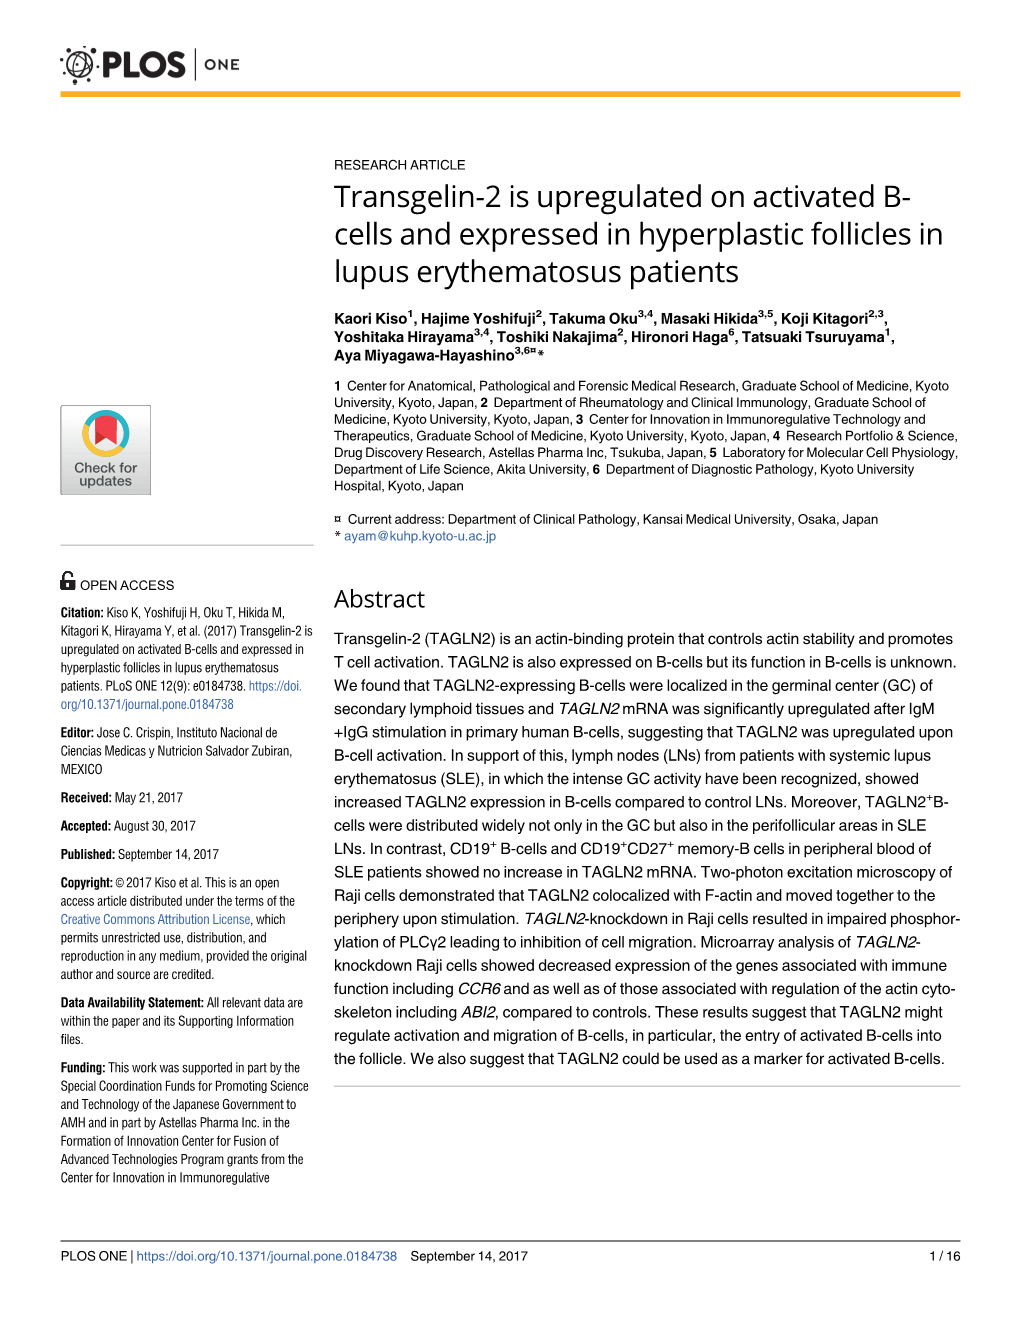 Transgelin-2 Is Upregulated on Activated B-Cells and Expressed In